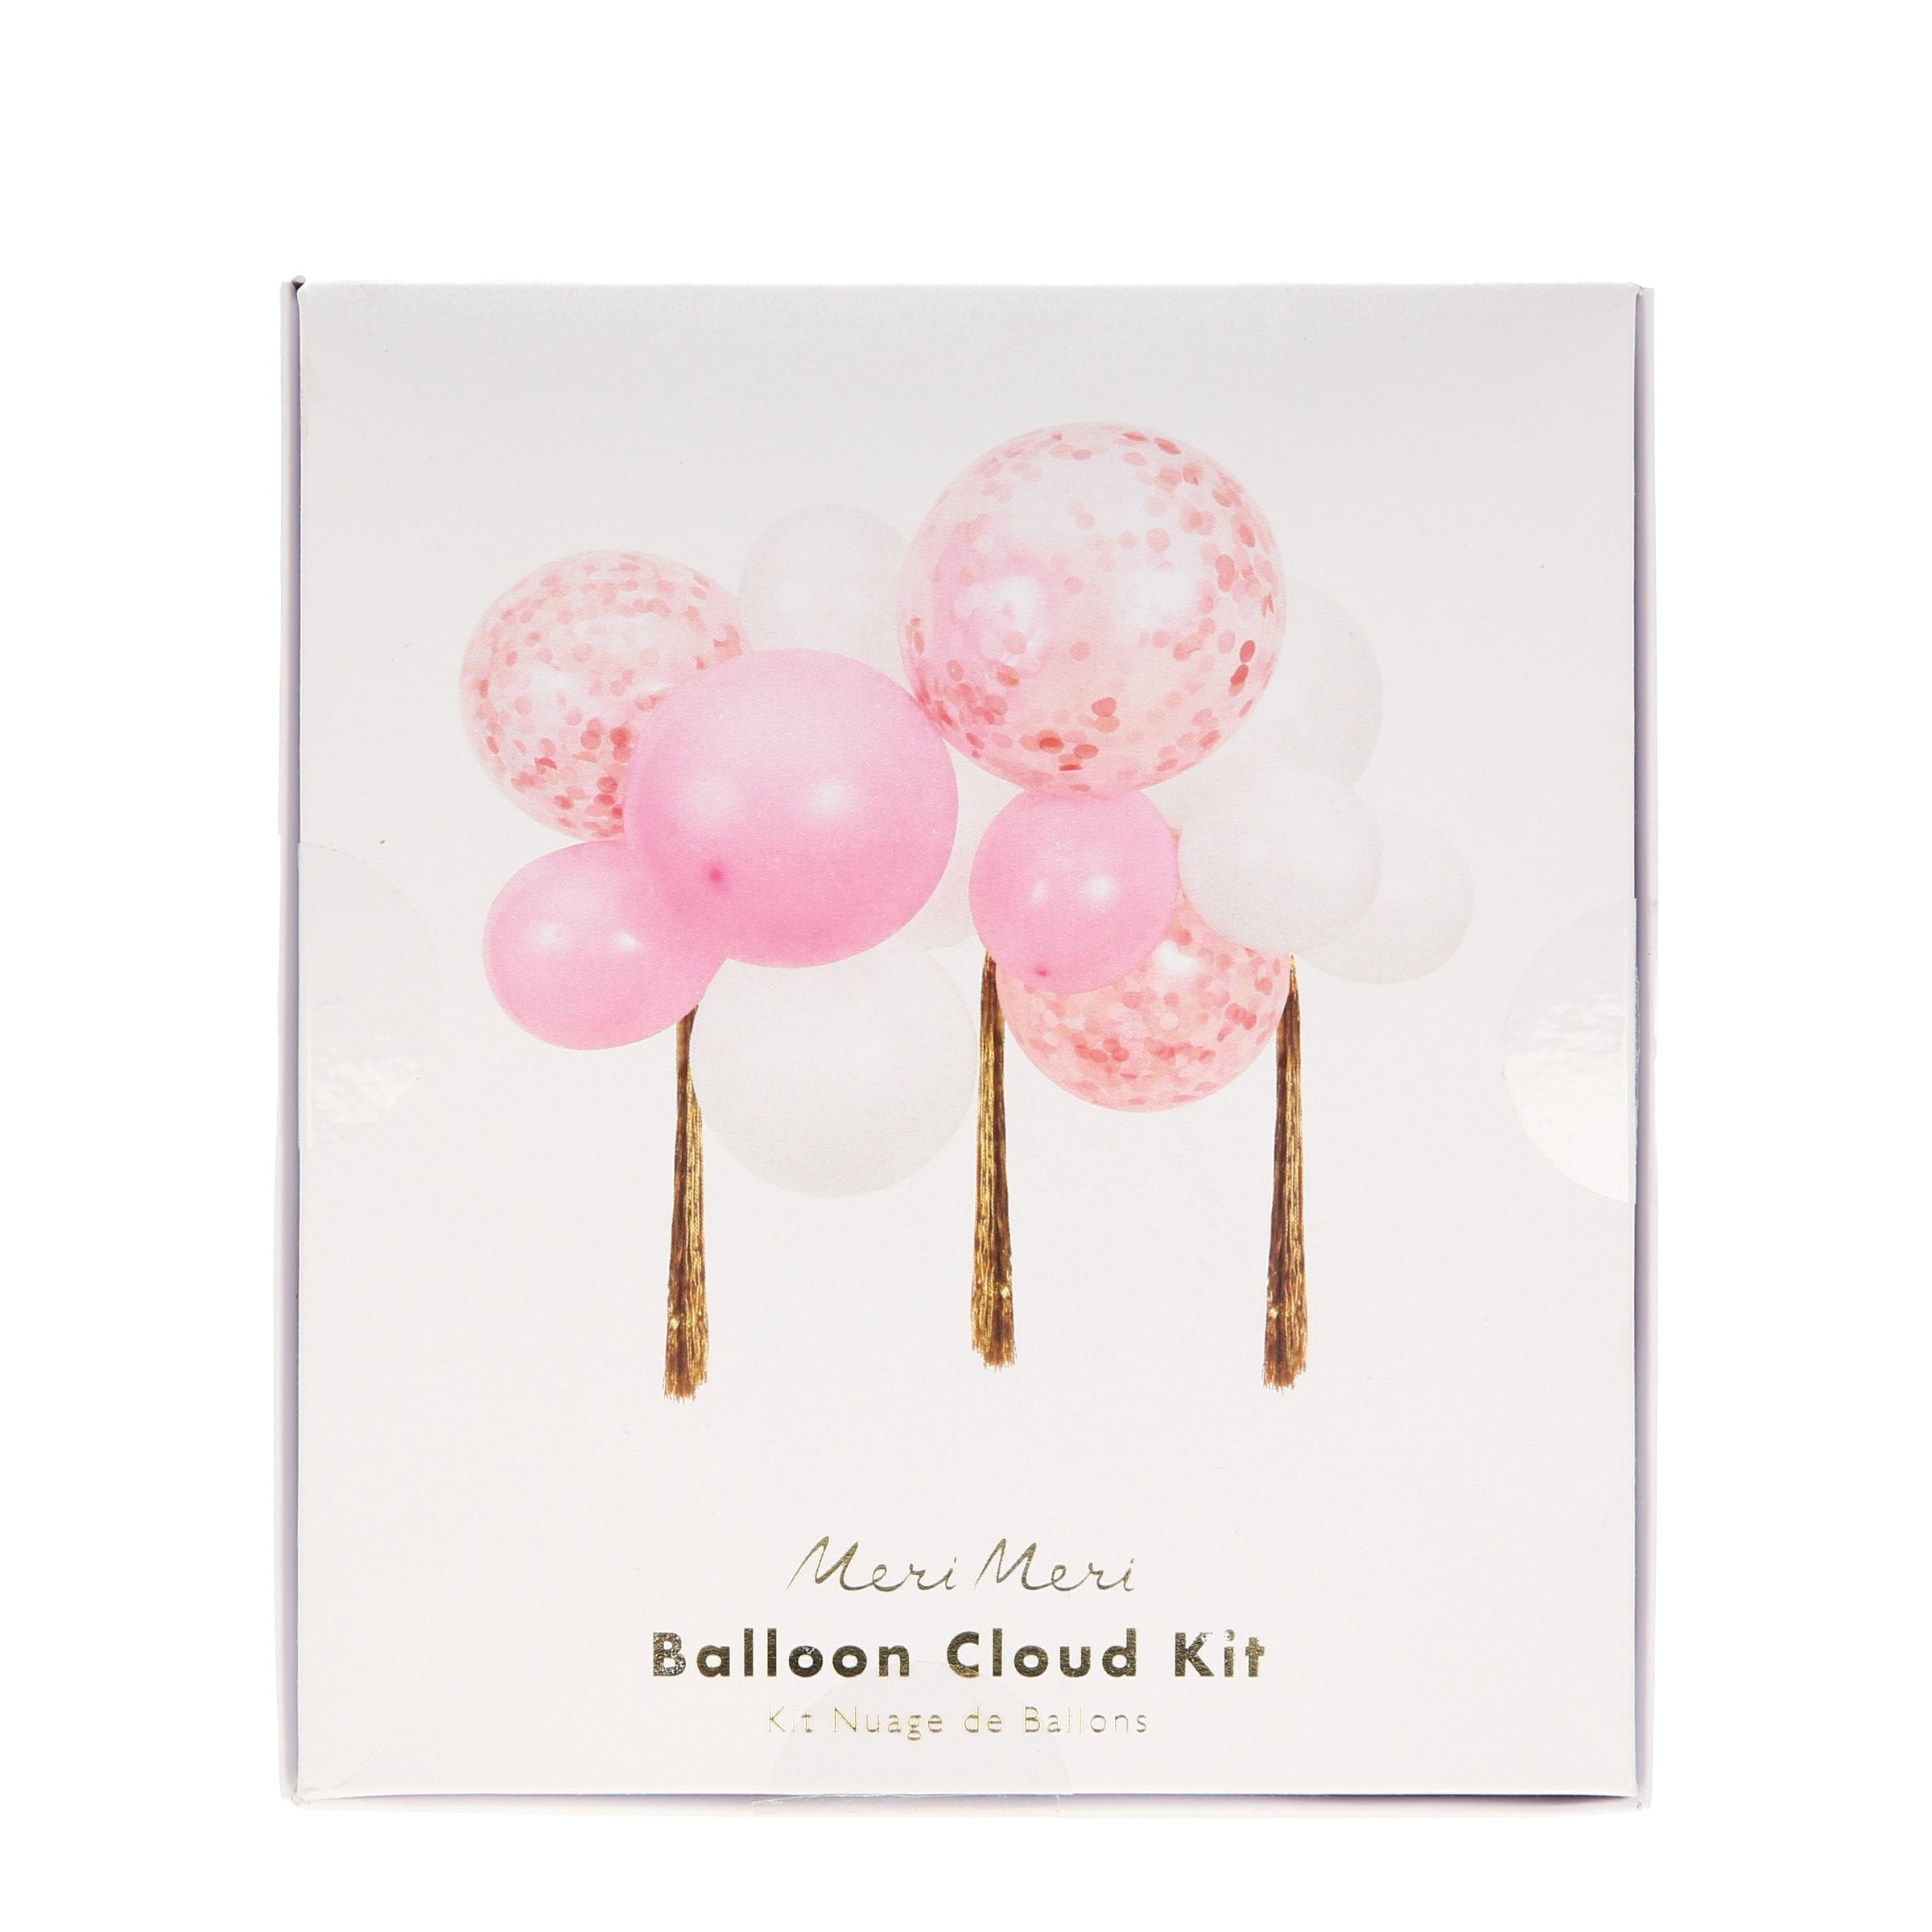 Our balloon kit includes pink balloons, white balloons, confetti balloons and gold streamers.